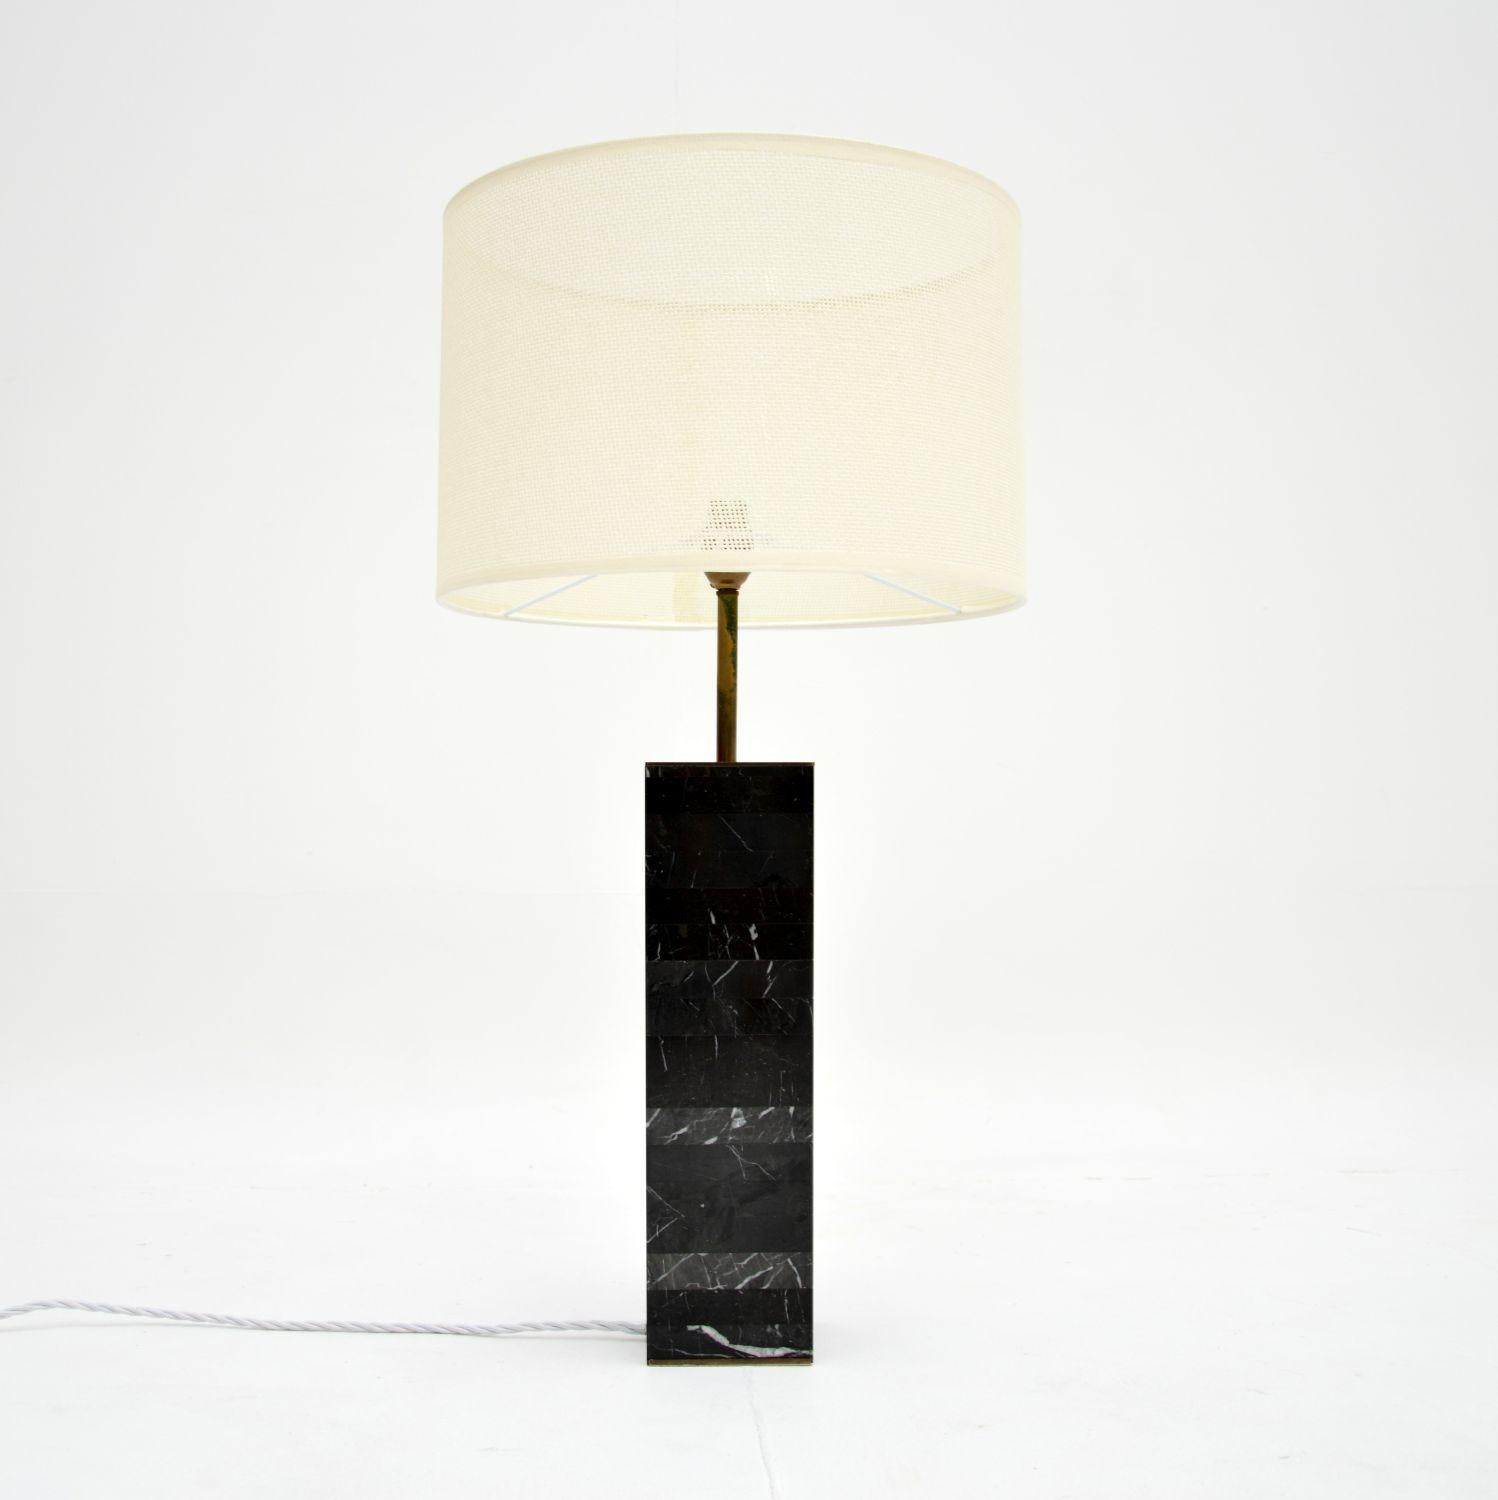 A superb 1970’s vintage layered solid marble table lamp. Dating from the 1970’s, it was likely made in Italy.

This is of outstanding quality, it is a large and impressive size. The marble is absolutely gorgeous and is constructed in layers, with a